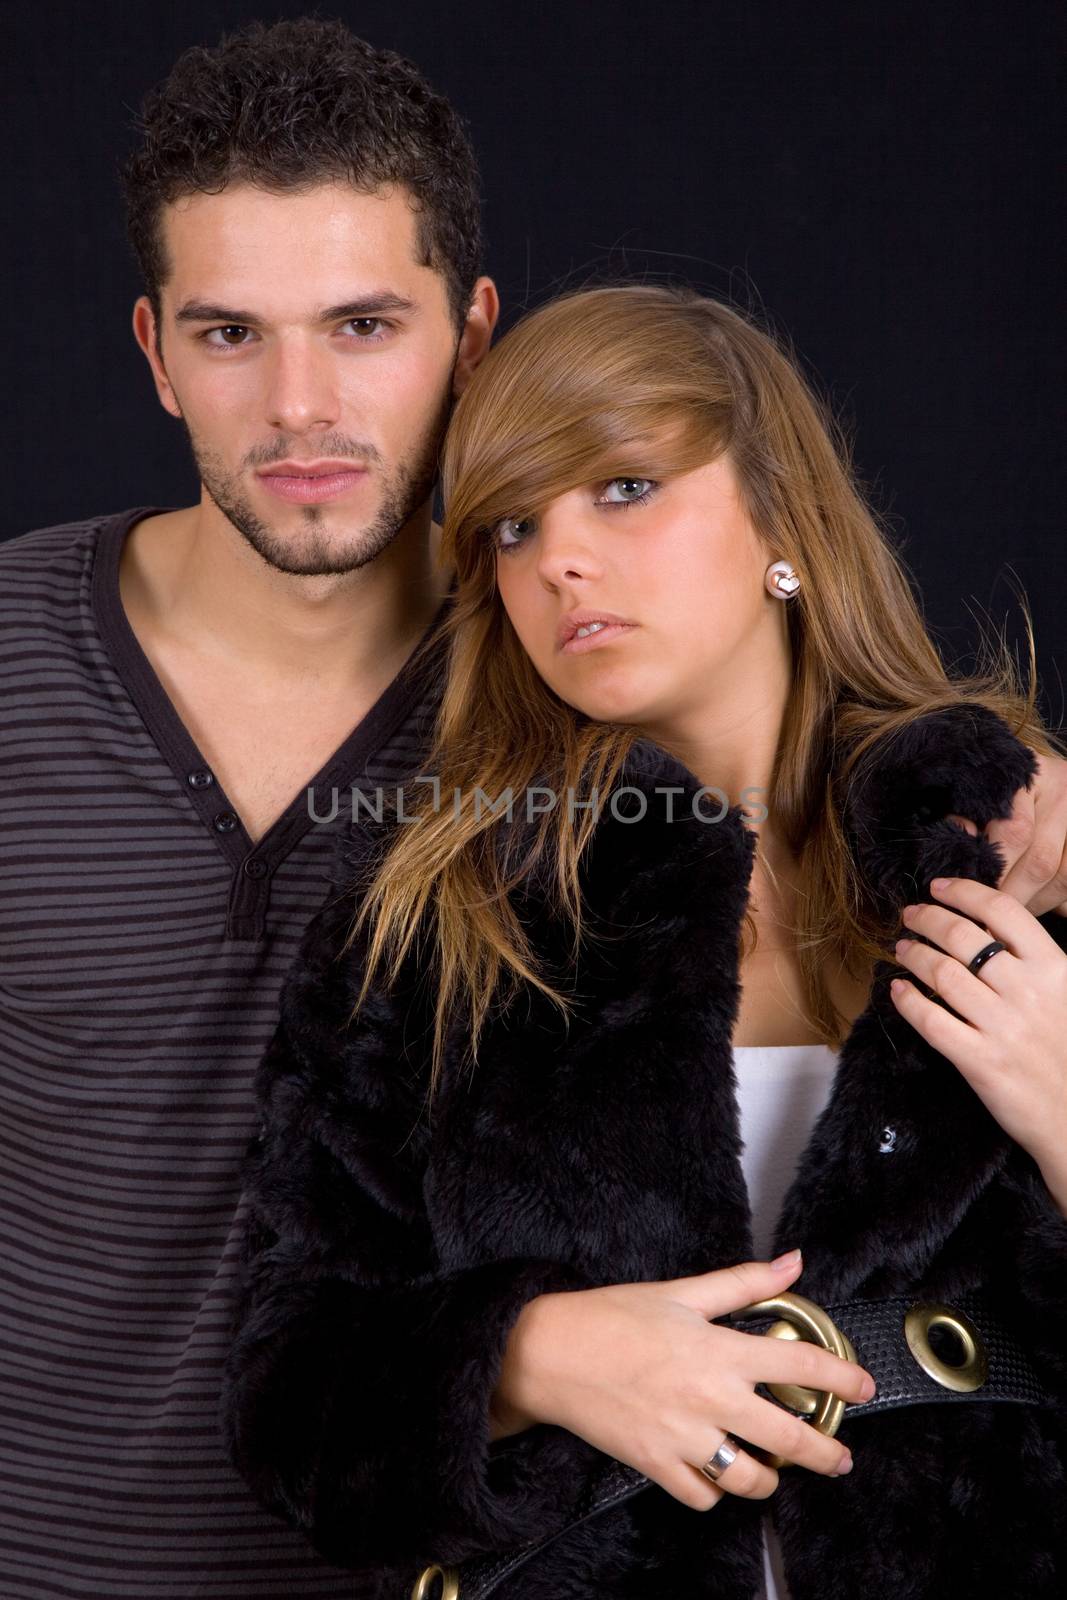 young couple together portrait on black background